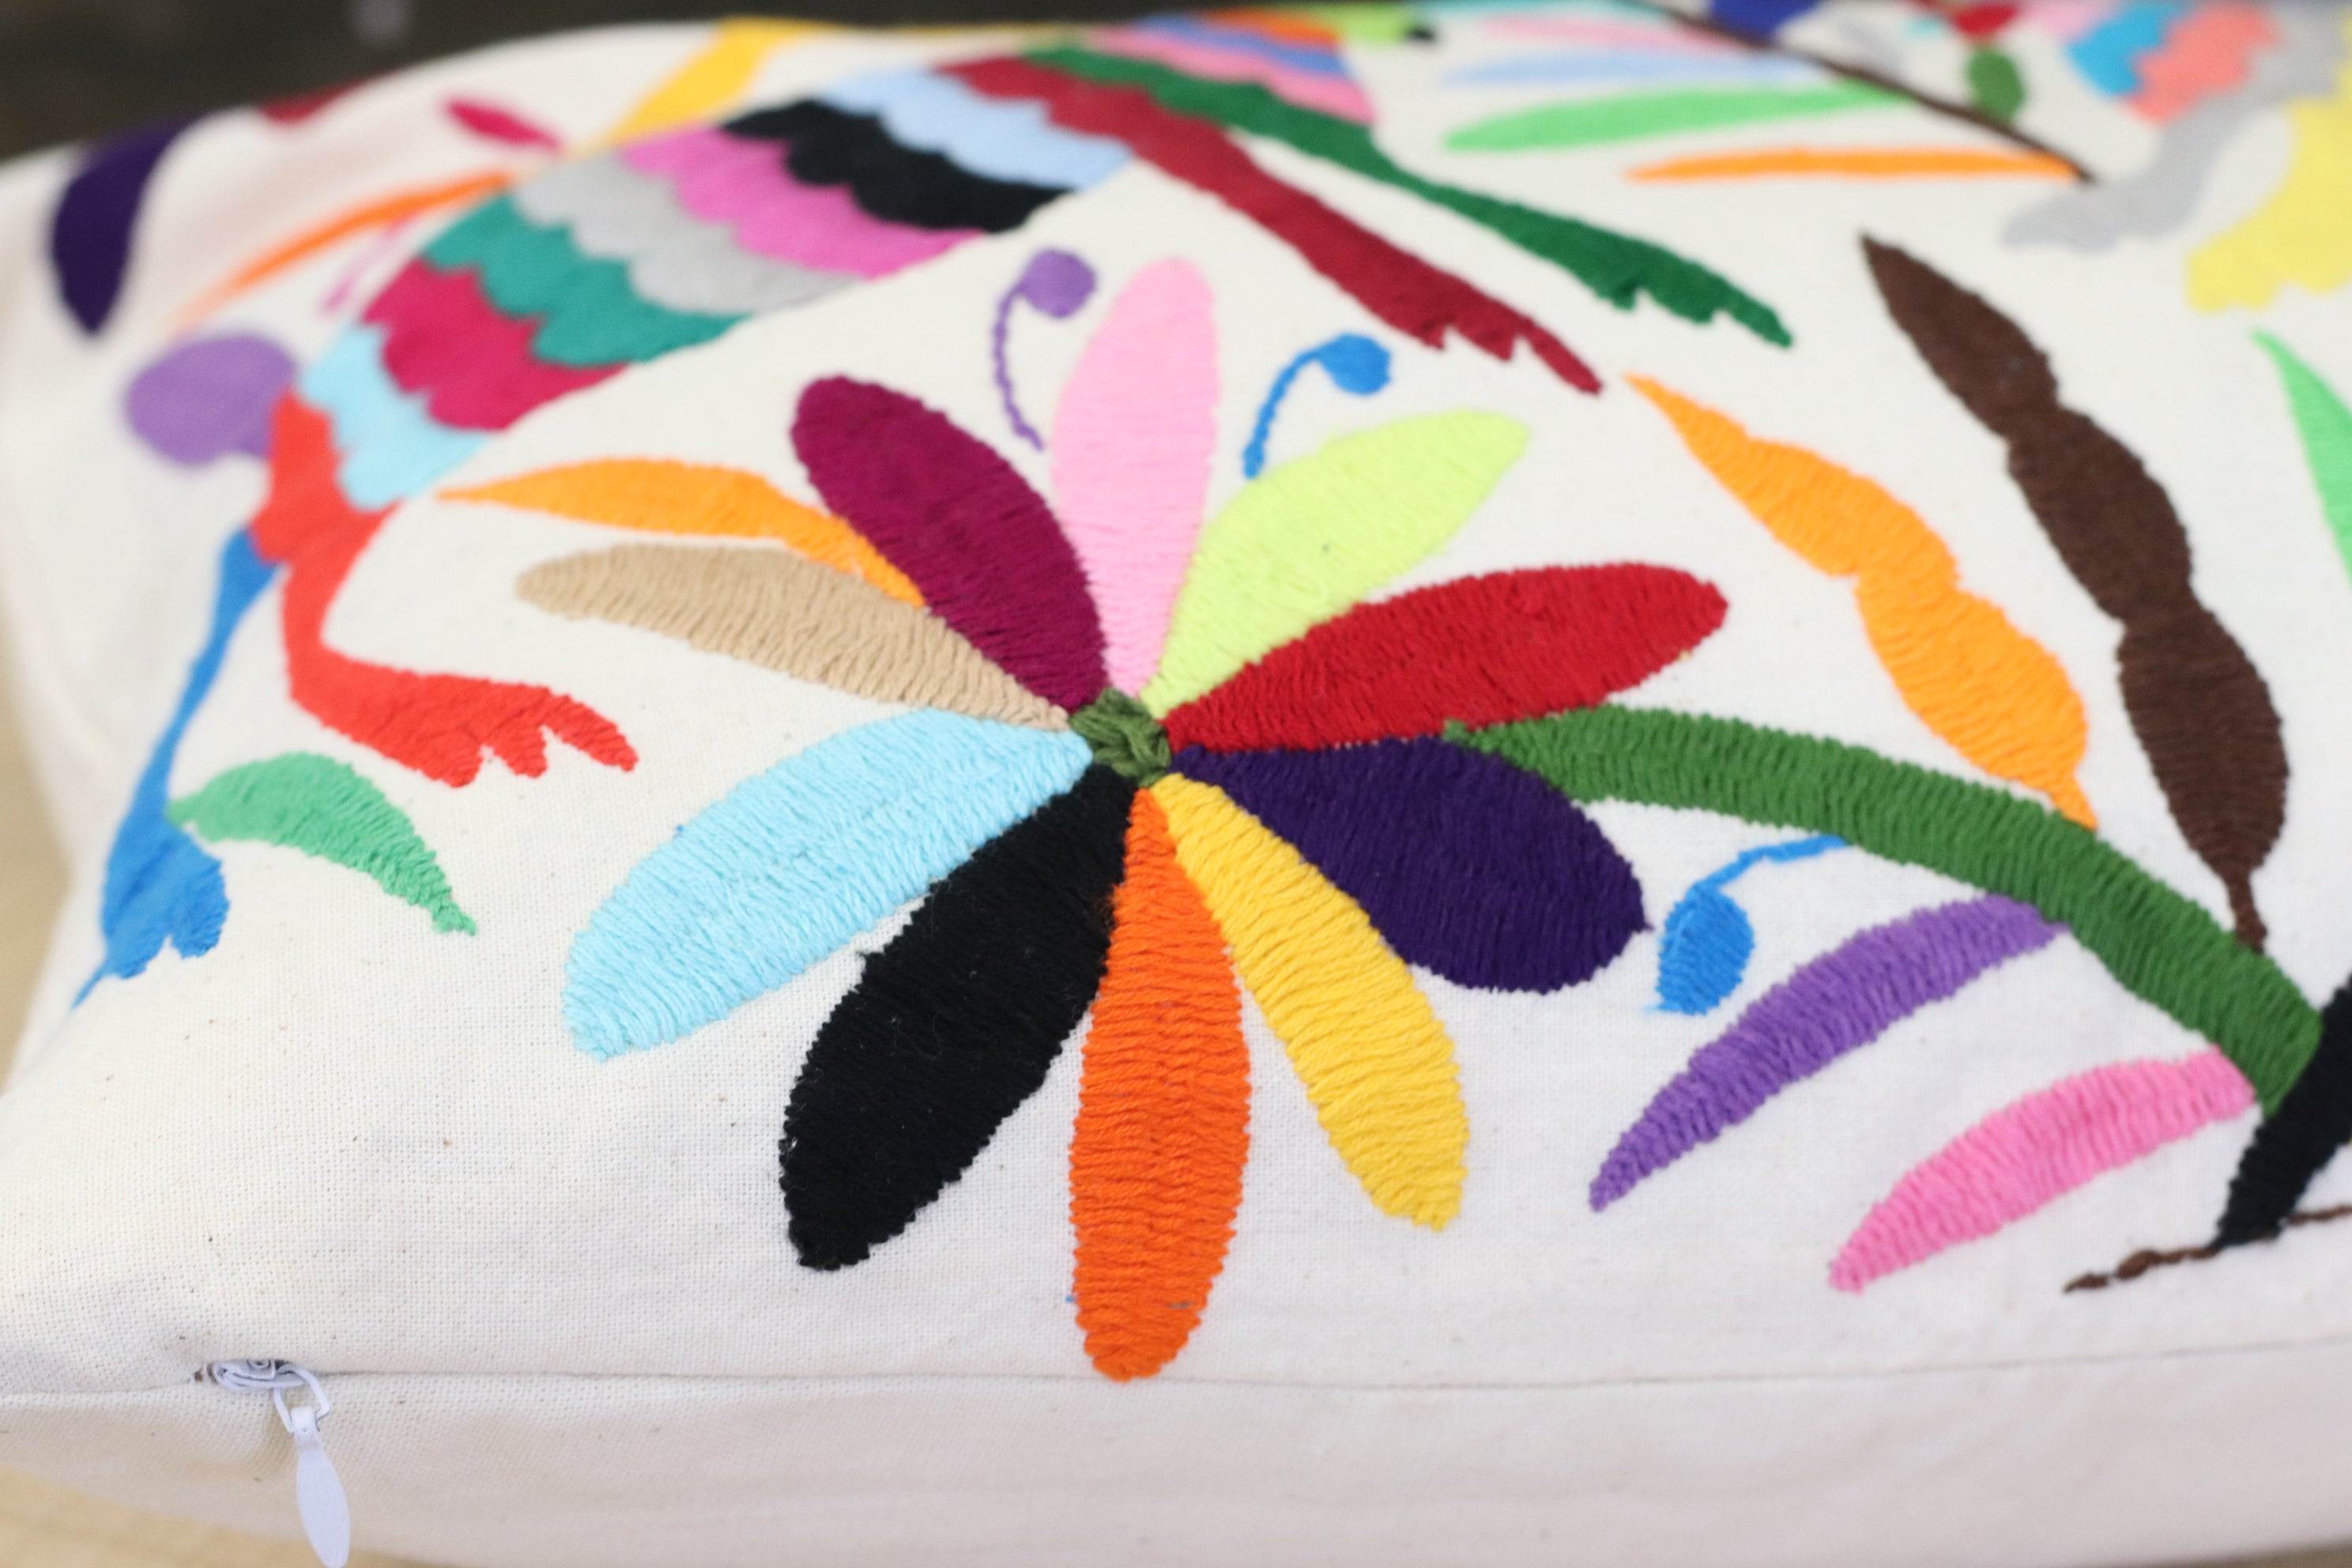 Rectangle Otomi Tenango Pillow Cover with Hand Embroidered Birds, Flowers, and Animals in Vibrant Colors. Handmade in Mexico. Ships from the USA. Buy now at www.felipeandgrace.com.